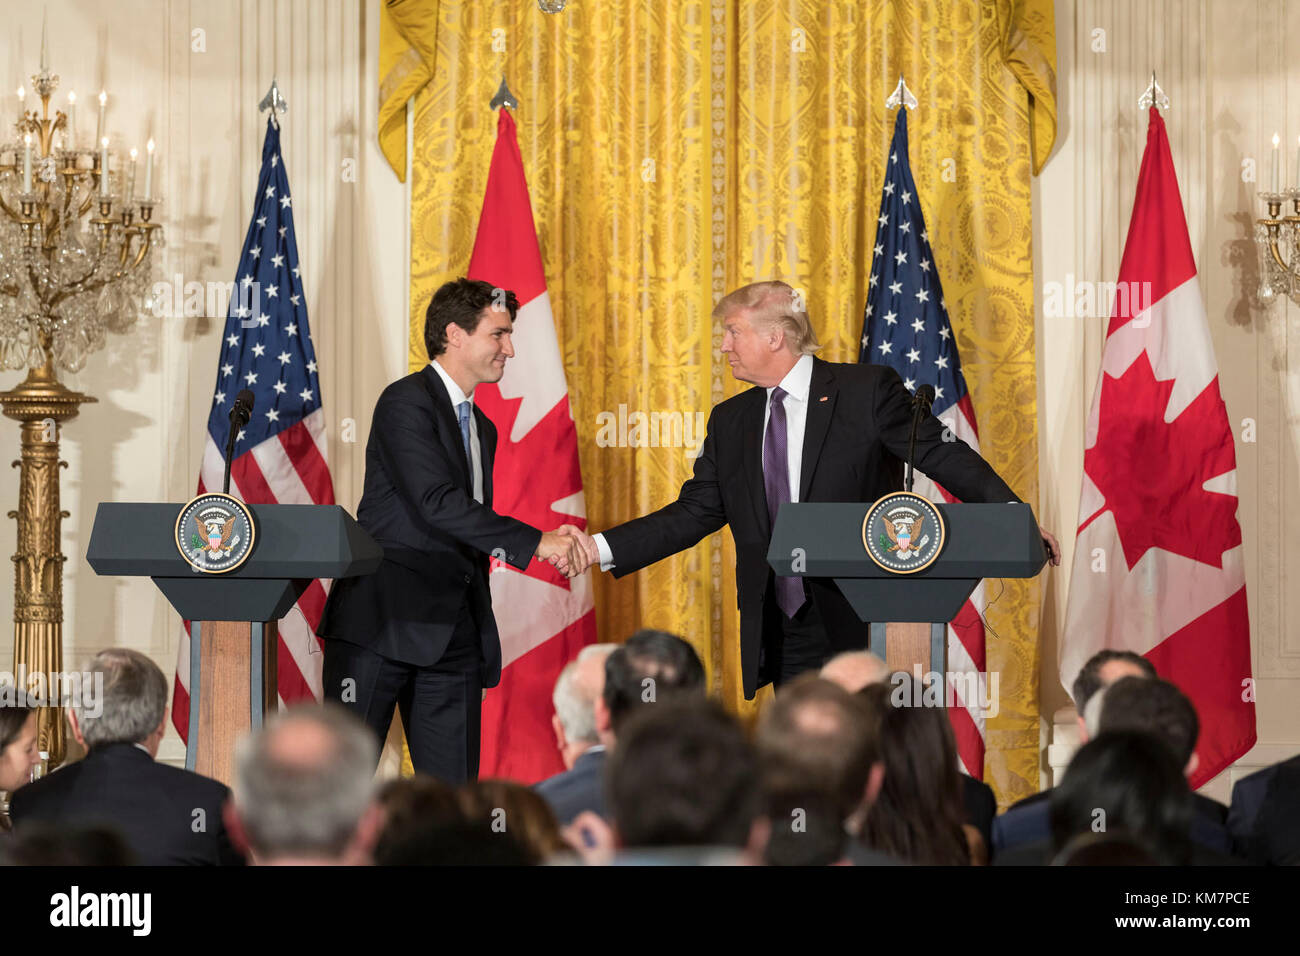 President Donald Trump and Canadian Prime Minister Justin Trudeau shake hands during a joint press conference, Monday, Feb. 13, 2017, in the East Room of the White House. (Official White House Photo by Shealah Craighead) Stock Photo